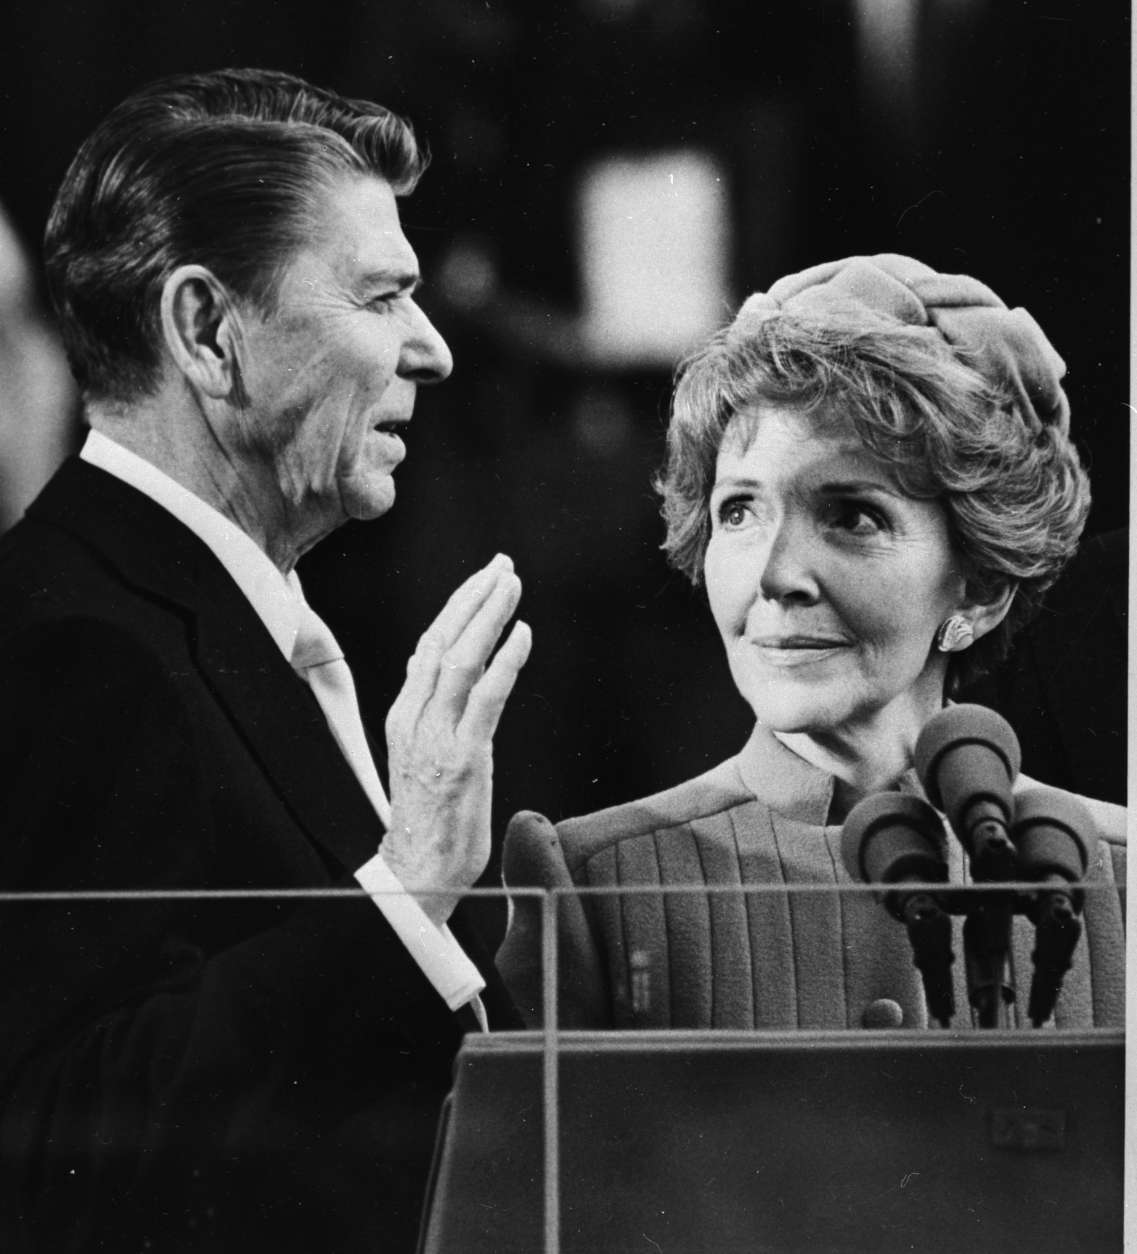 Nancy Reagan proudly watches as her husband Ronald Reagan takes the oath of office at the Capitol January 20, 1981.  (AP Photo)